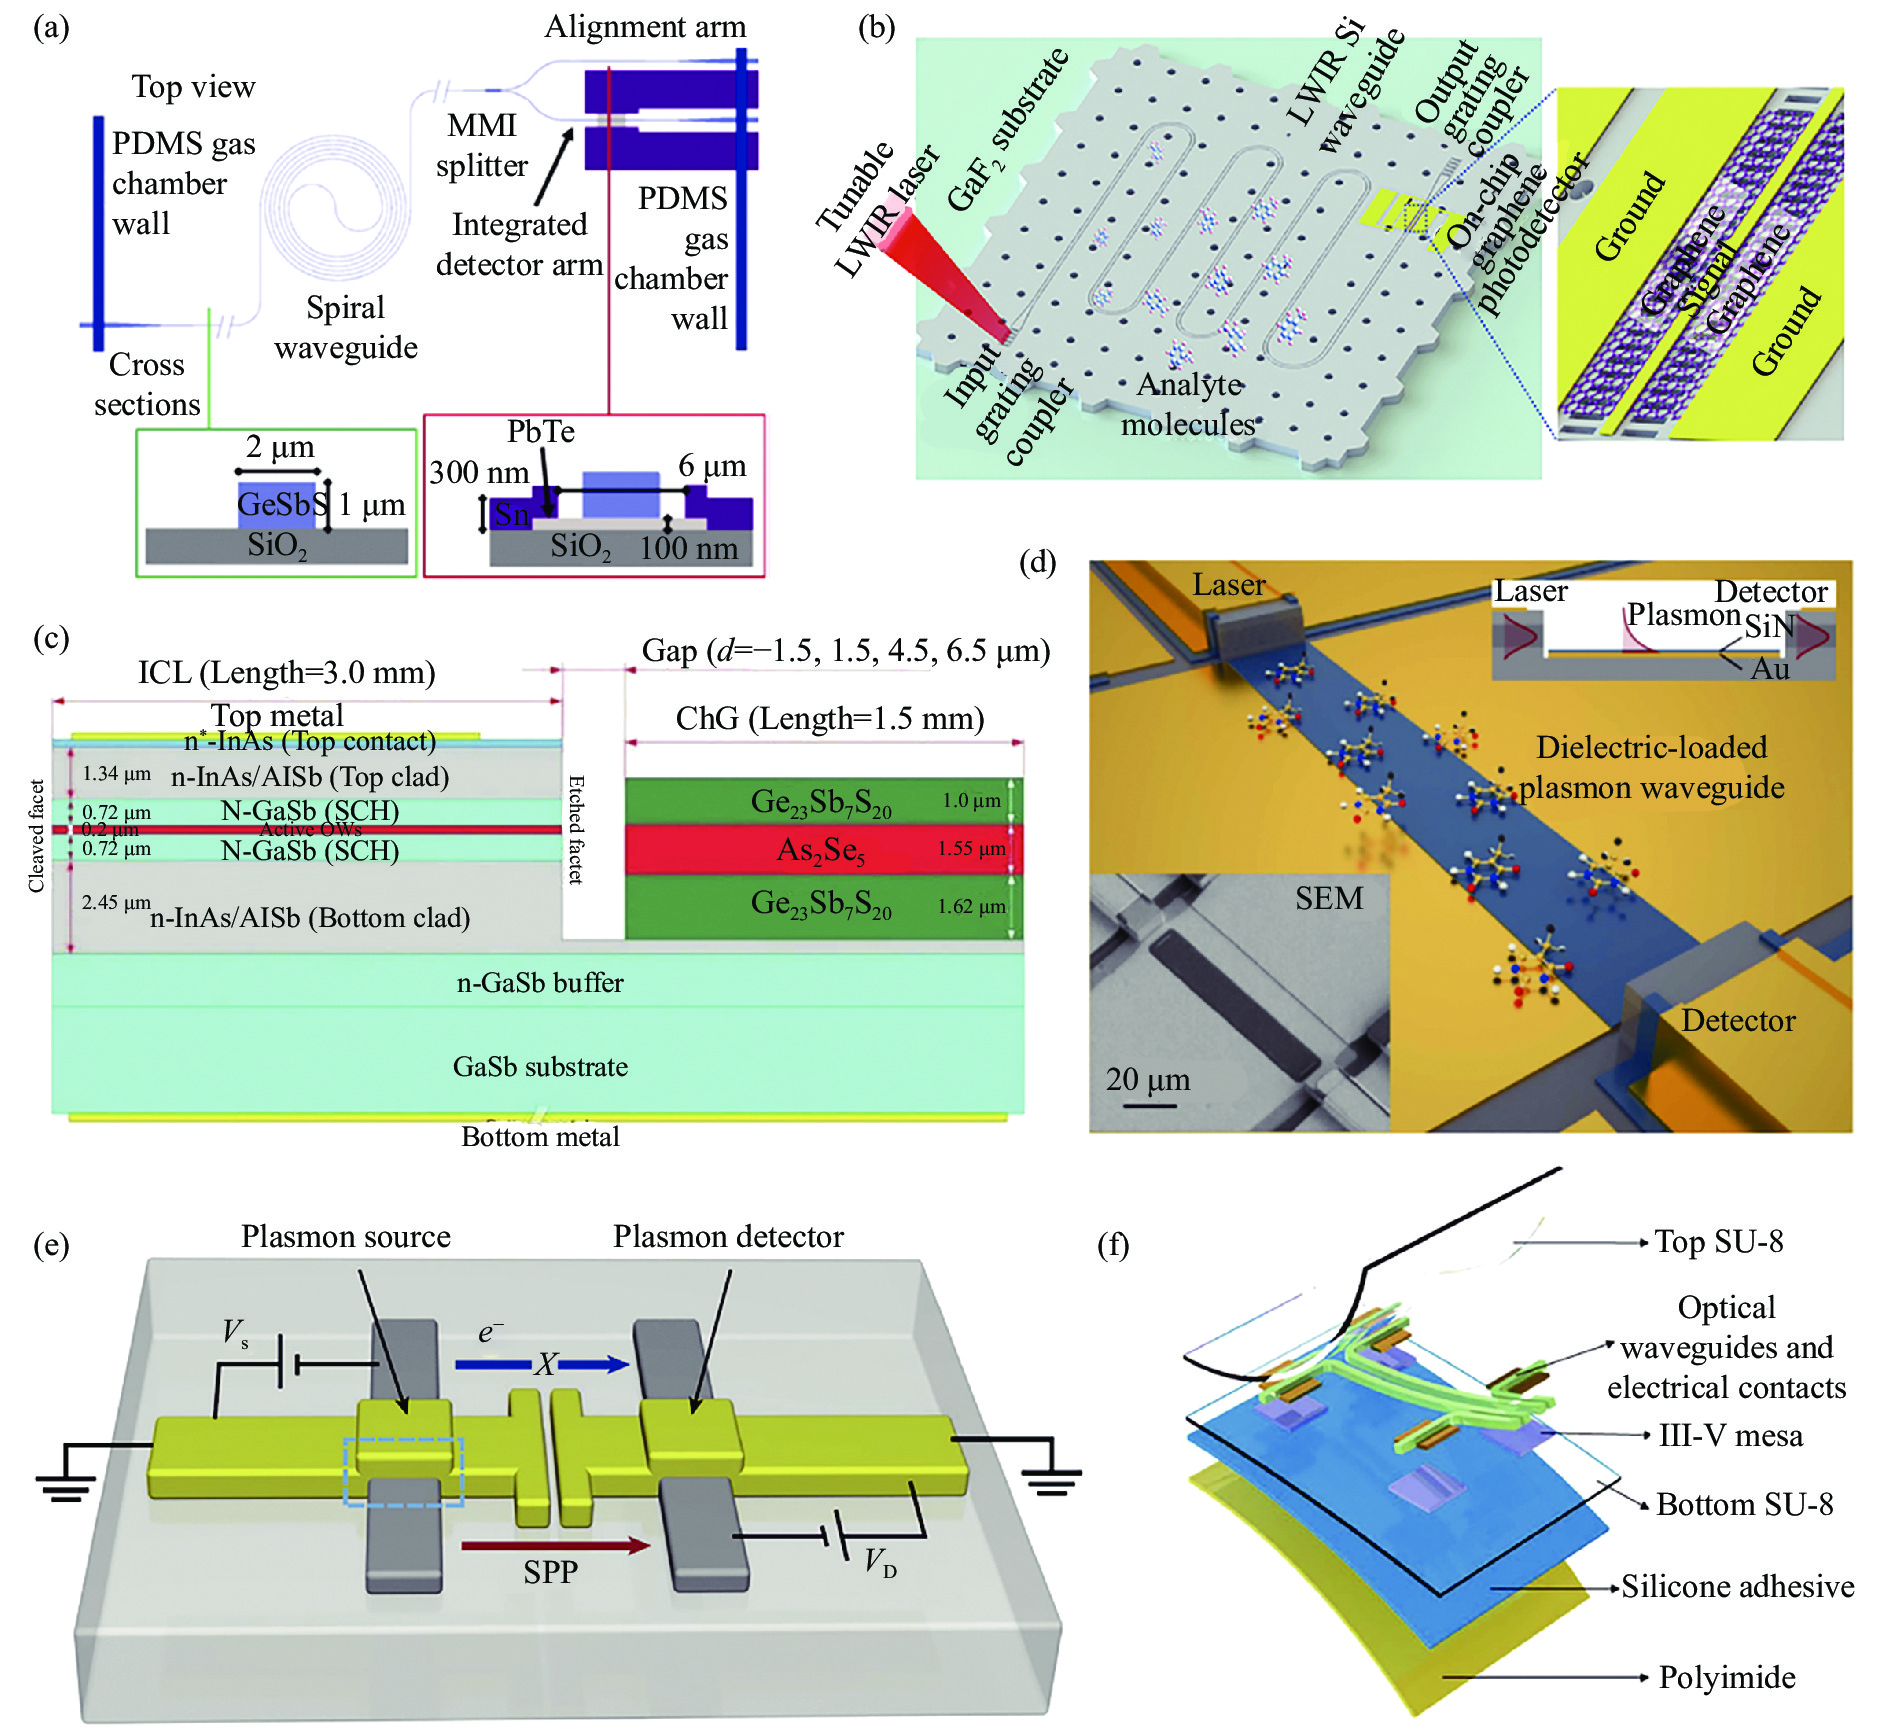 On-chip optical sensing technology based on non-dispersive light absorption of the waveguide mode. (a) Monolithic gas sensor with GeSbS spiral optical sensing waveguide and PbTe waveguide detector [65]; (b) Monolithic gas sensor with silicon optical sensing waveguide and graphene waveguide detector on CaF2 substrate [66]; (c) Monolithic integration of epitaxially grown inter-band cascade laser and deposited As2Se3 optical sensing waveguide on GaSb substrate [67]; (d) Monolithic sensor with quantum cascade laser, quantum cascade detector and surface plasmon sensing waveguide on InP substrate [55]; (e) Monolithic integration of broadband light source and detector based on Al-AlOx-Au tunnel junction on glass substrate, which are connected by surface plasmon waveguide[56]; (f) Monolithic integration of InGaAs detector and chalcogenide glass optical sensing waveguide on polymer flexible substrate [68]